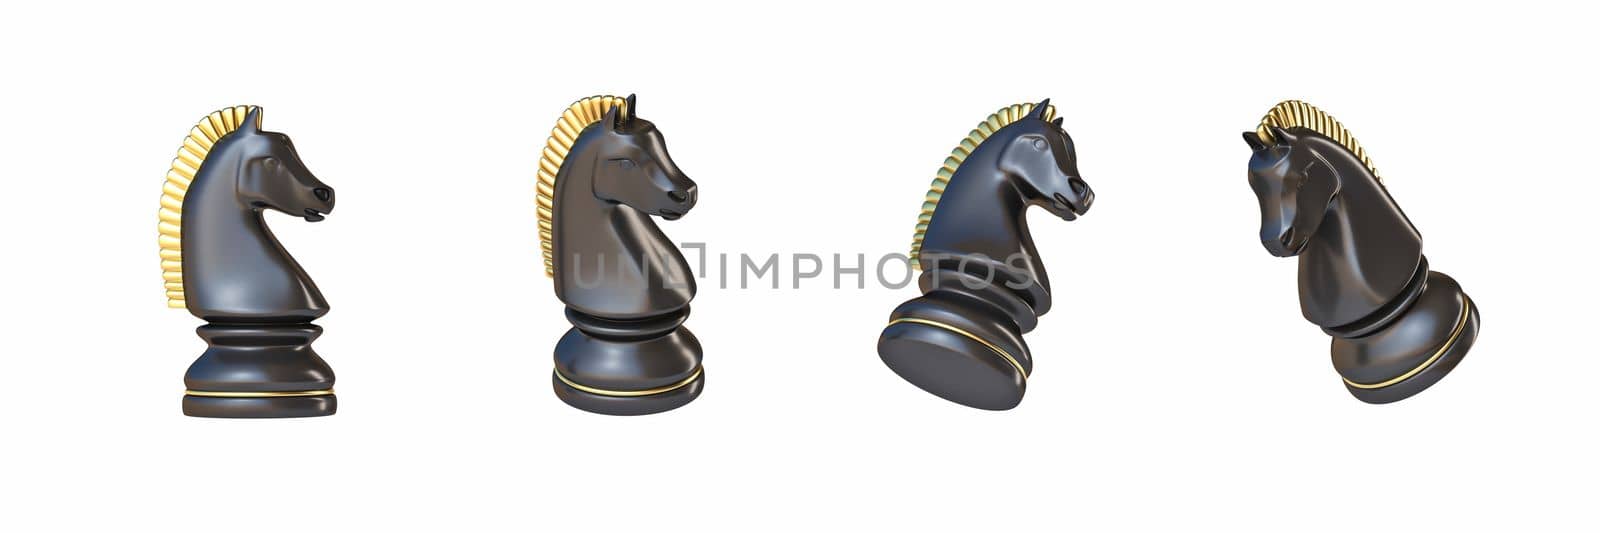 Black chess Knight in four different angled views 3D rendering illustration isolated on white background